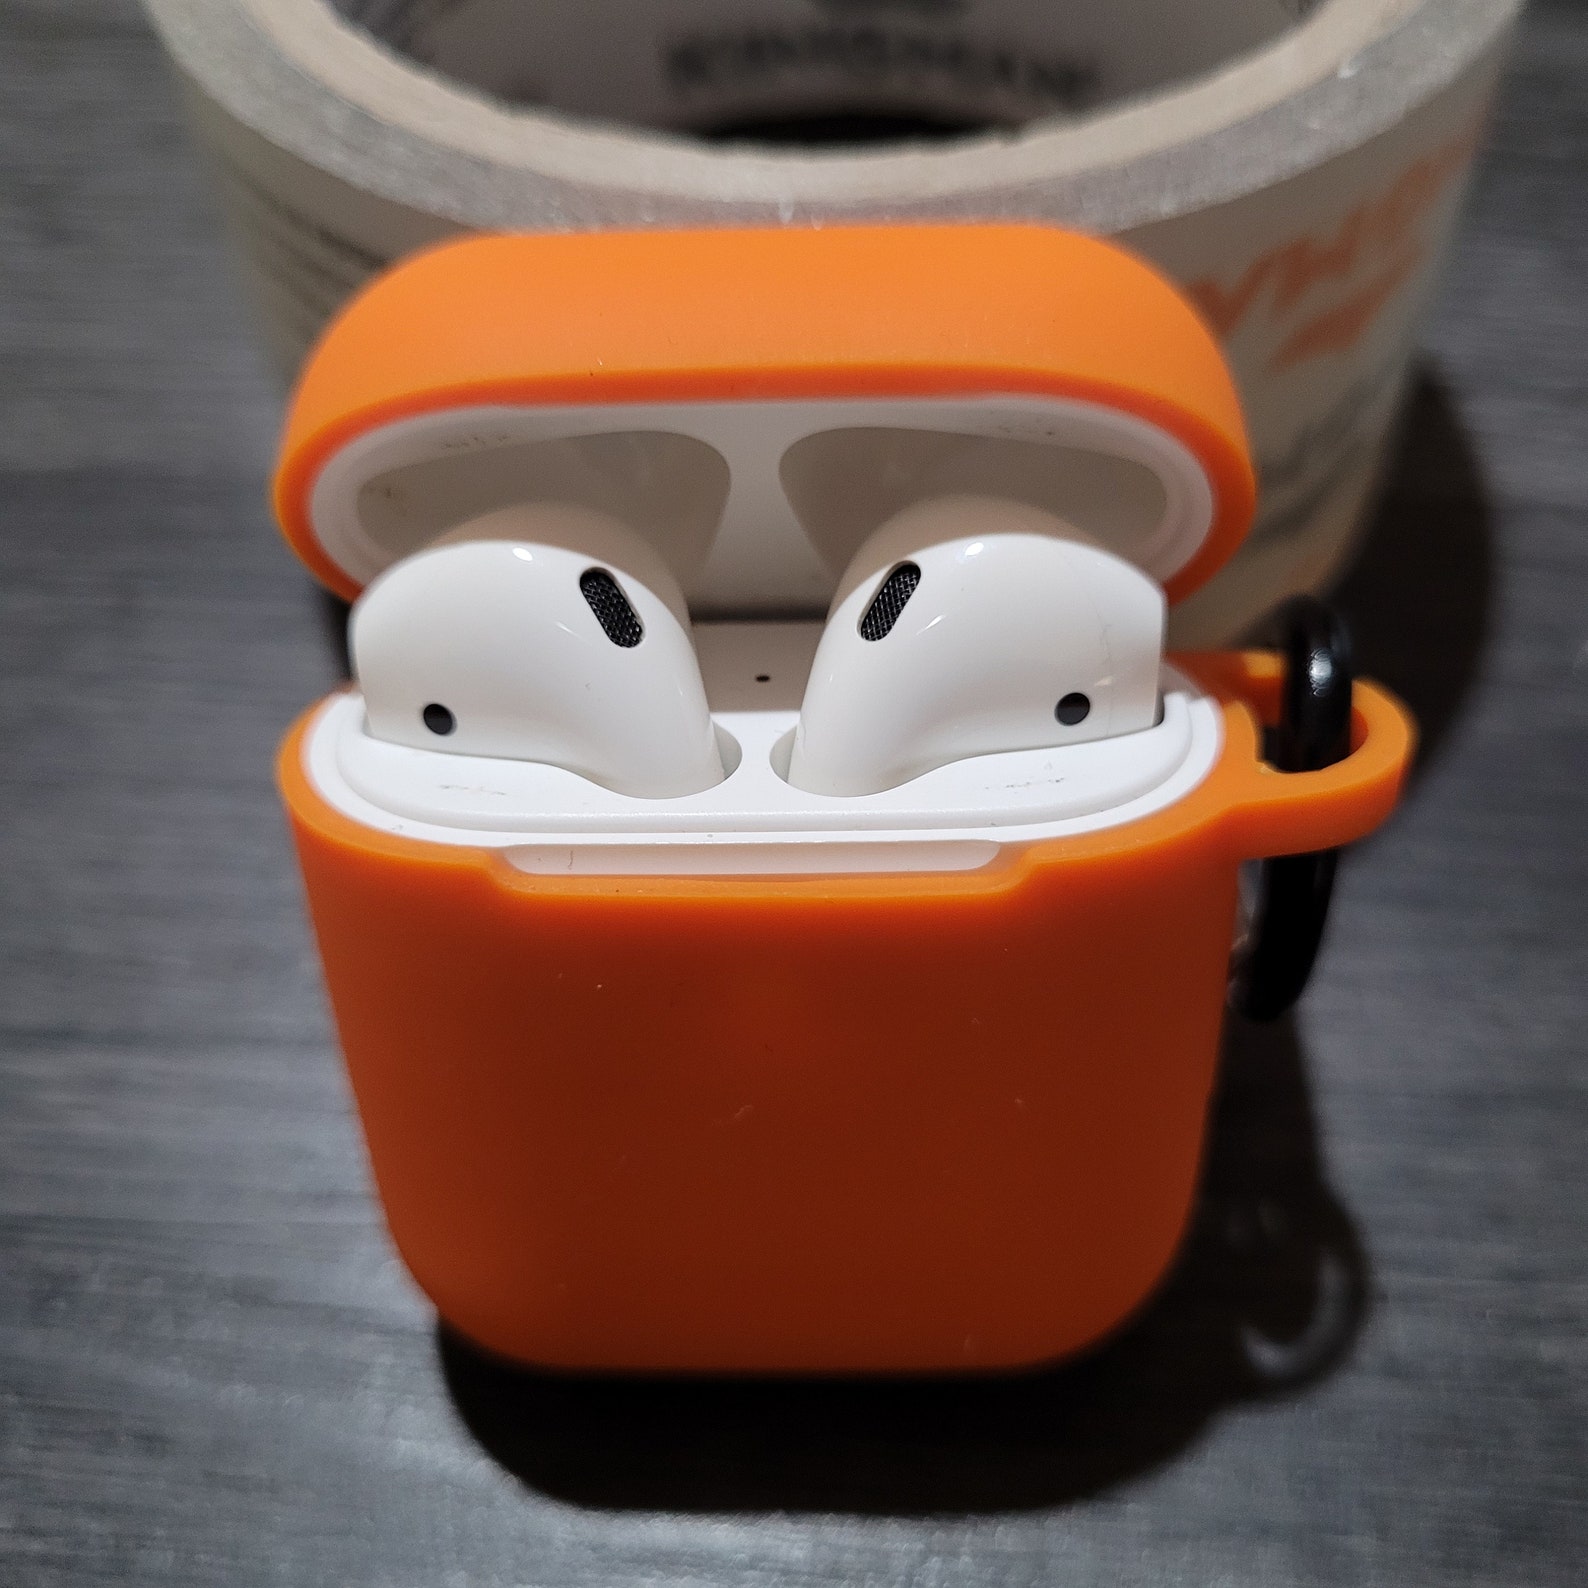 Orange Apple Airpod Case Series 1 and 2 Brand NEW Great Deals | Etsy